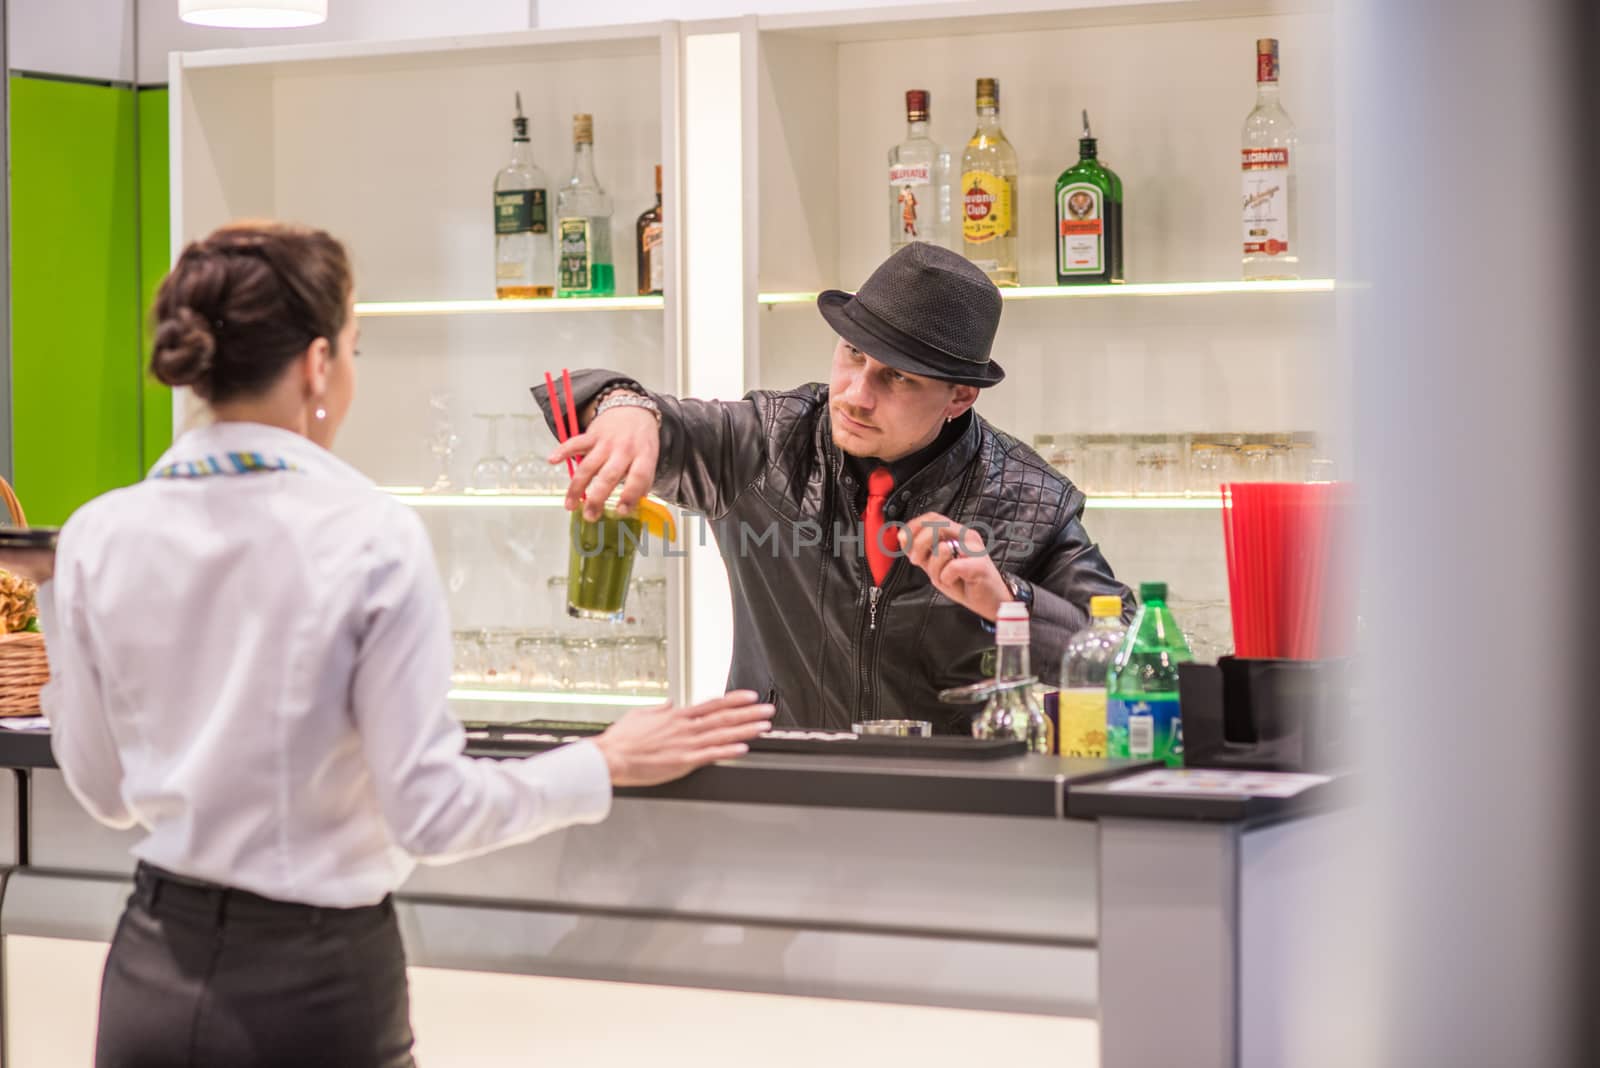 A experienced barman is preparing and serving a colorful cocktail at the Amper convention at the Bno Exhibition Center. czech Republic